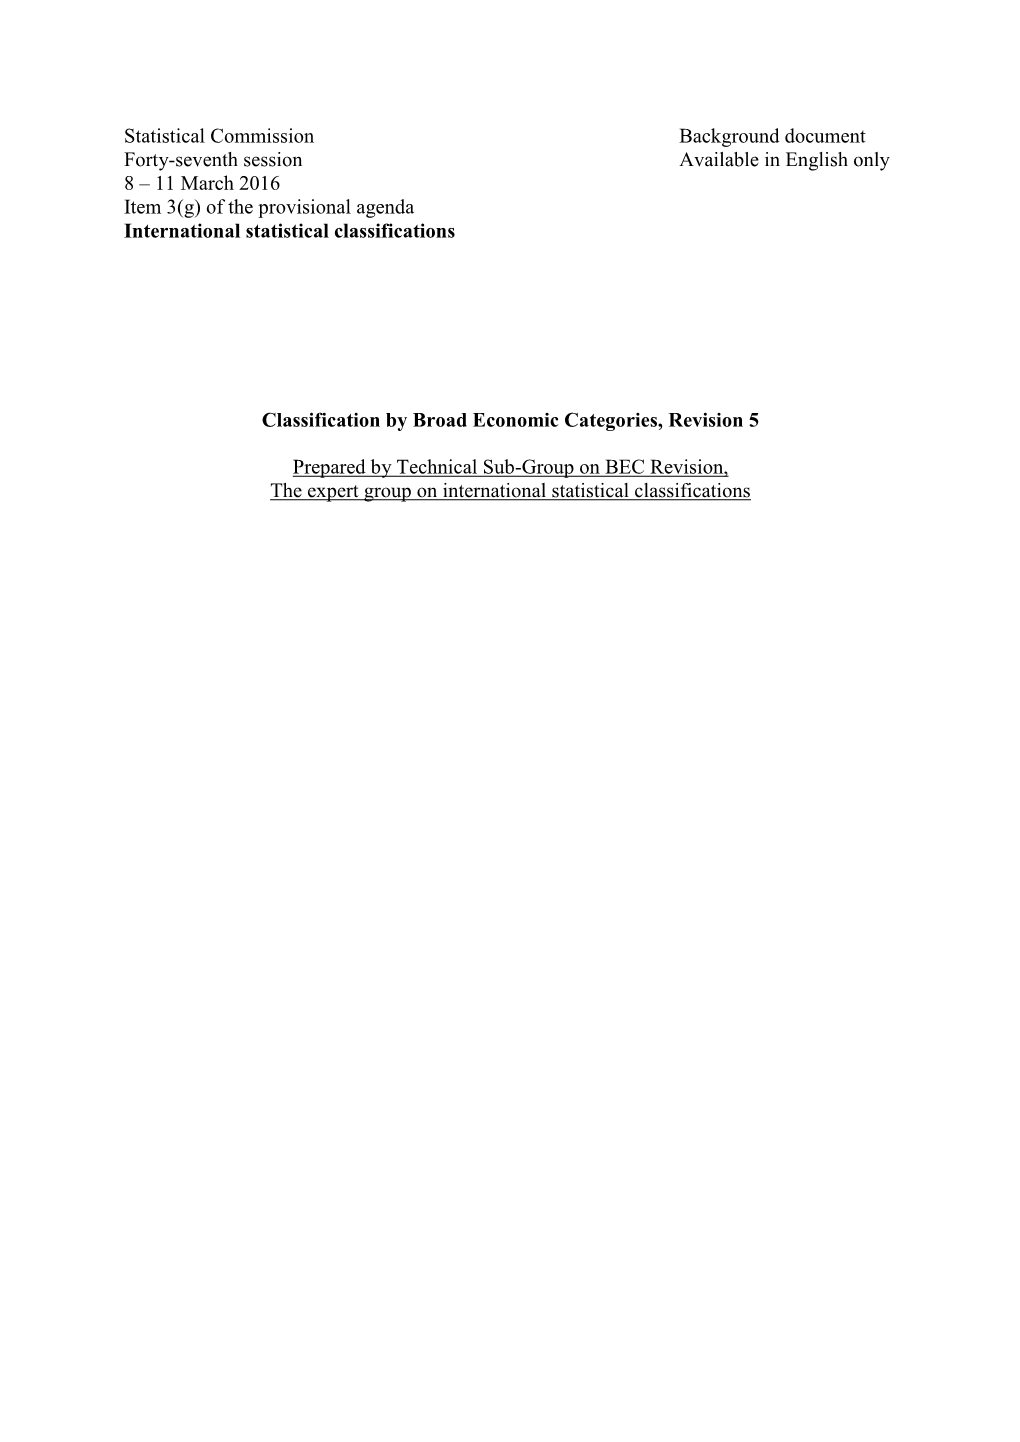 Classification by Broad Economic Categories, Revision 5